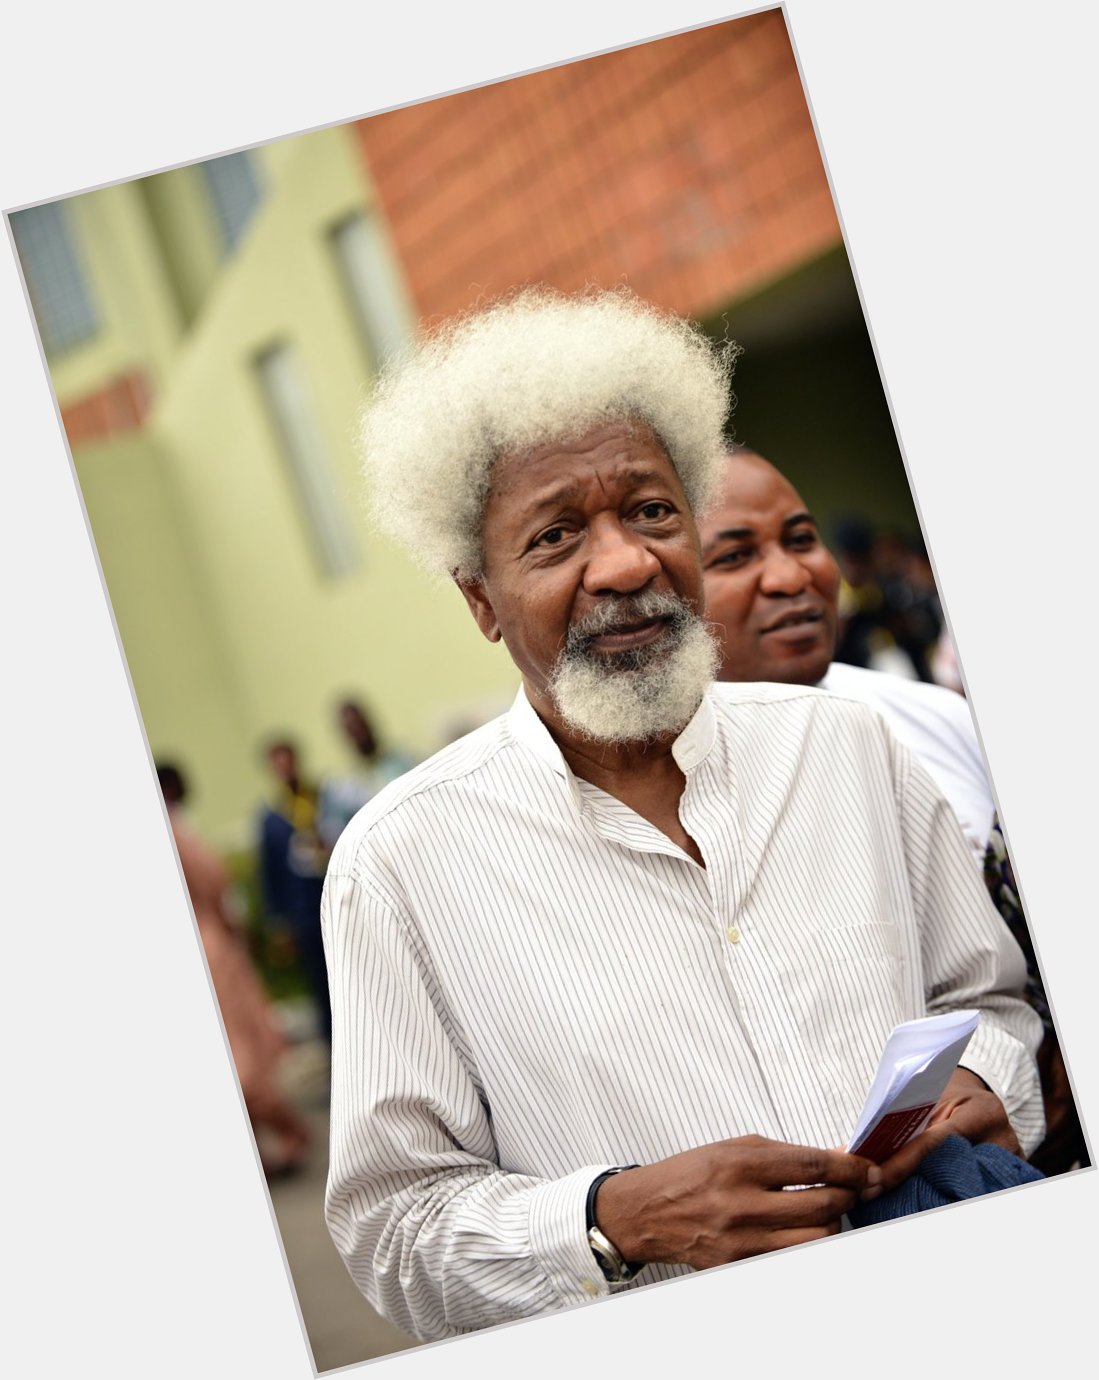 Wole Soyinka is a 86 years old.
Happy birthday to the icon 